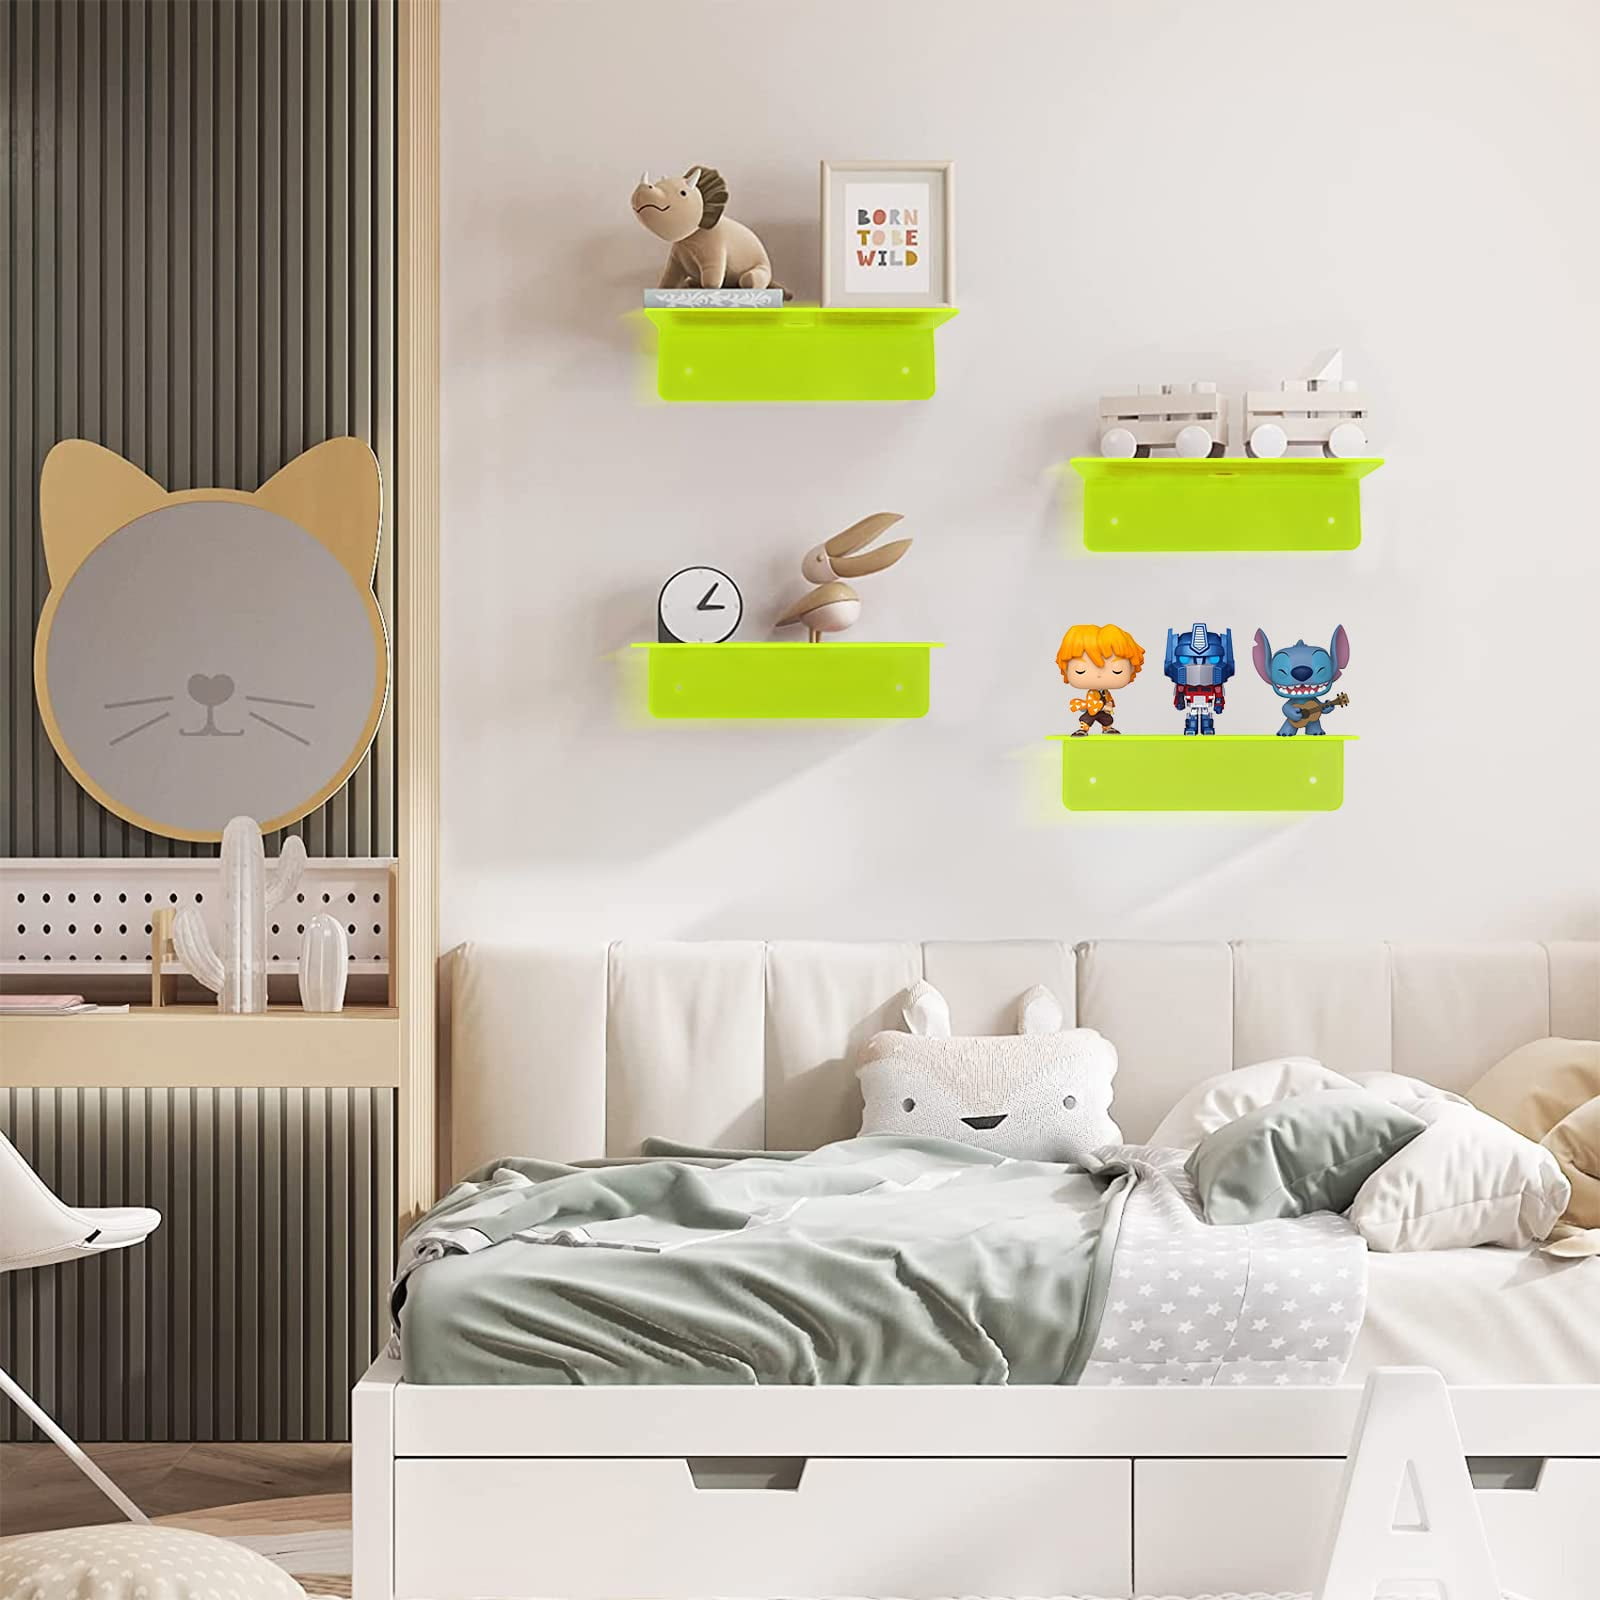 Acrylic Small Adhesive Wall Shelves,Mini Floating Shelves,Acrylic Display Shelves,Ledges for Pop Figures,Plant,Picture Photo Modern Wall for Bedroom